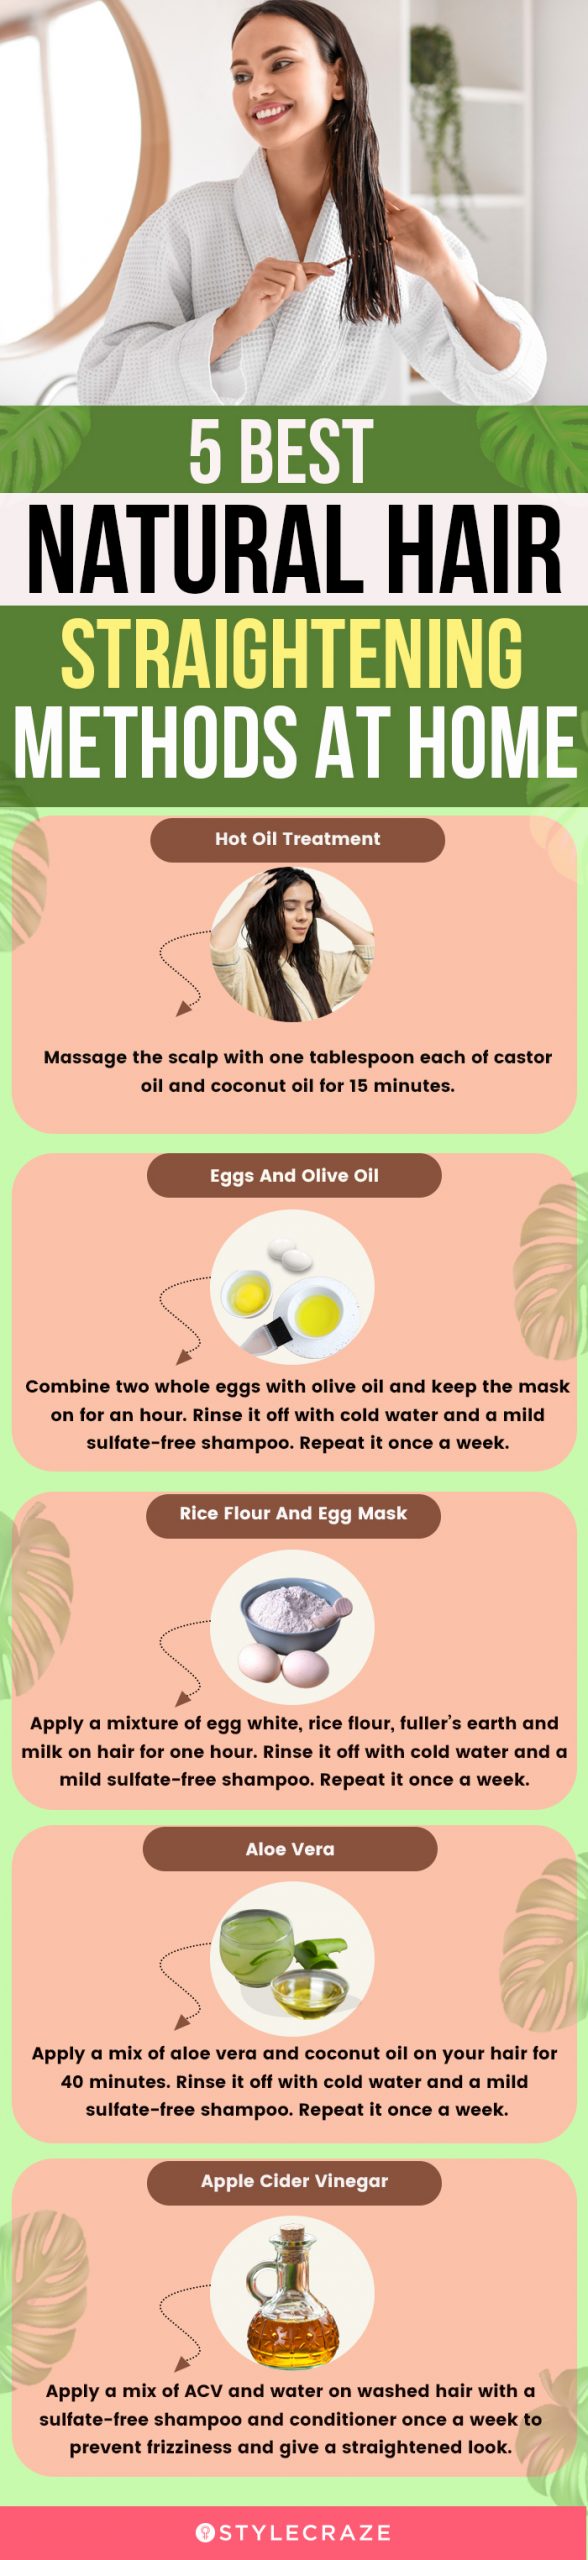 5 best natural hair straightening methods at home (infographic)